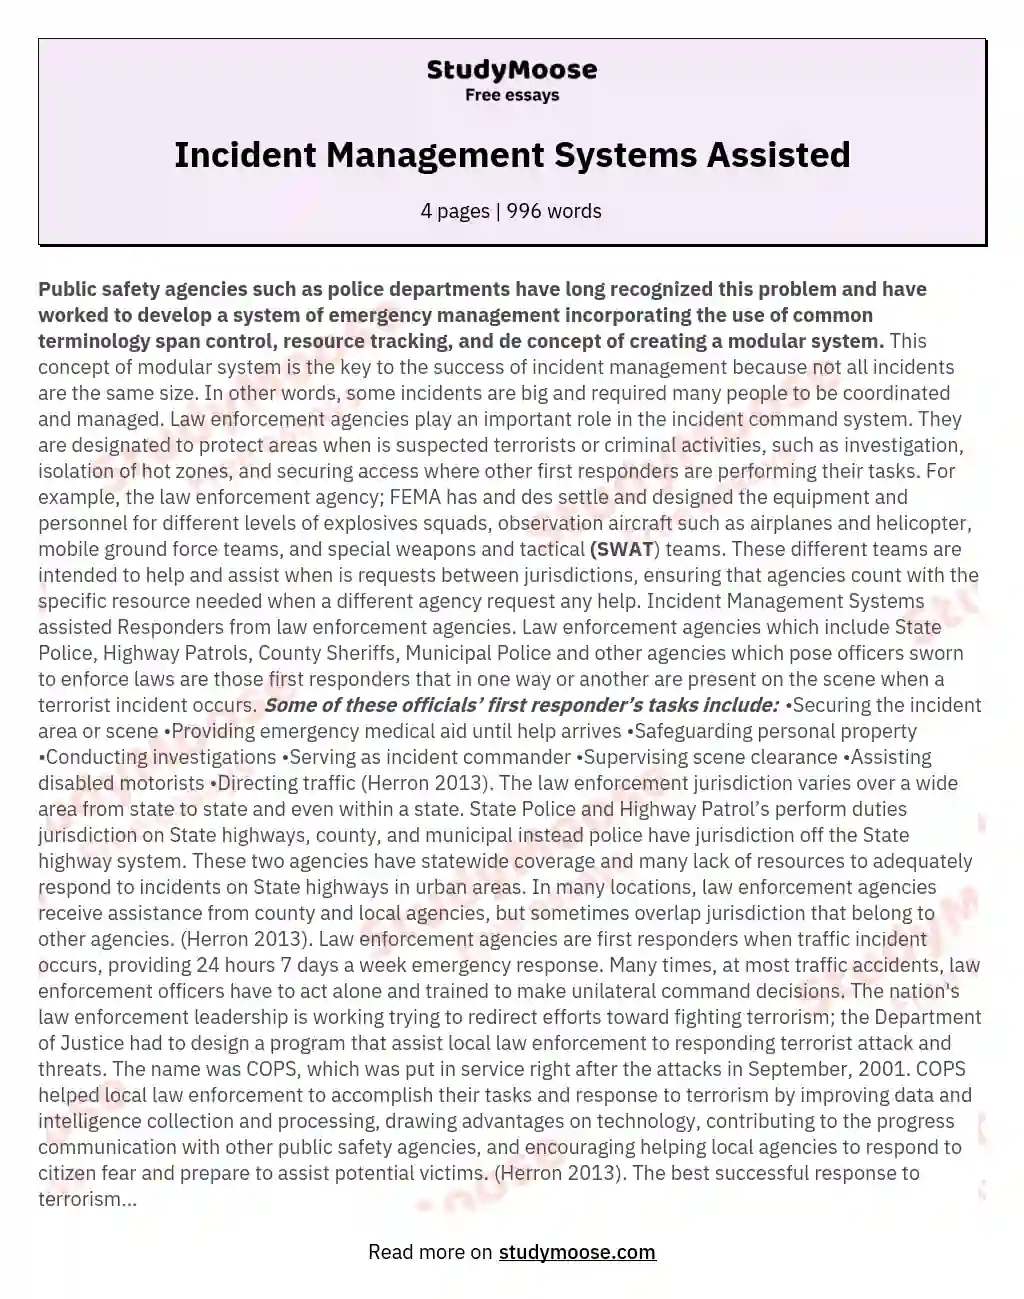 Incident Management Systems Assisted essay